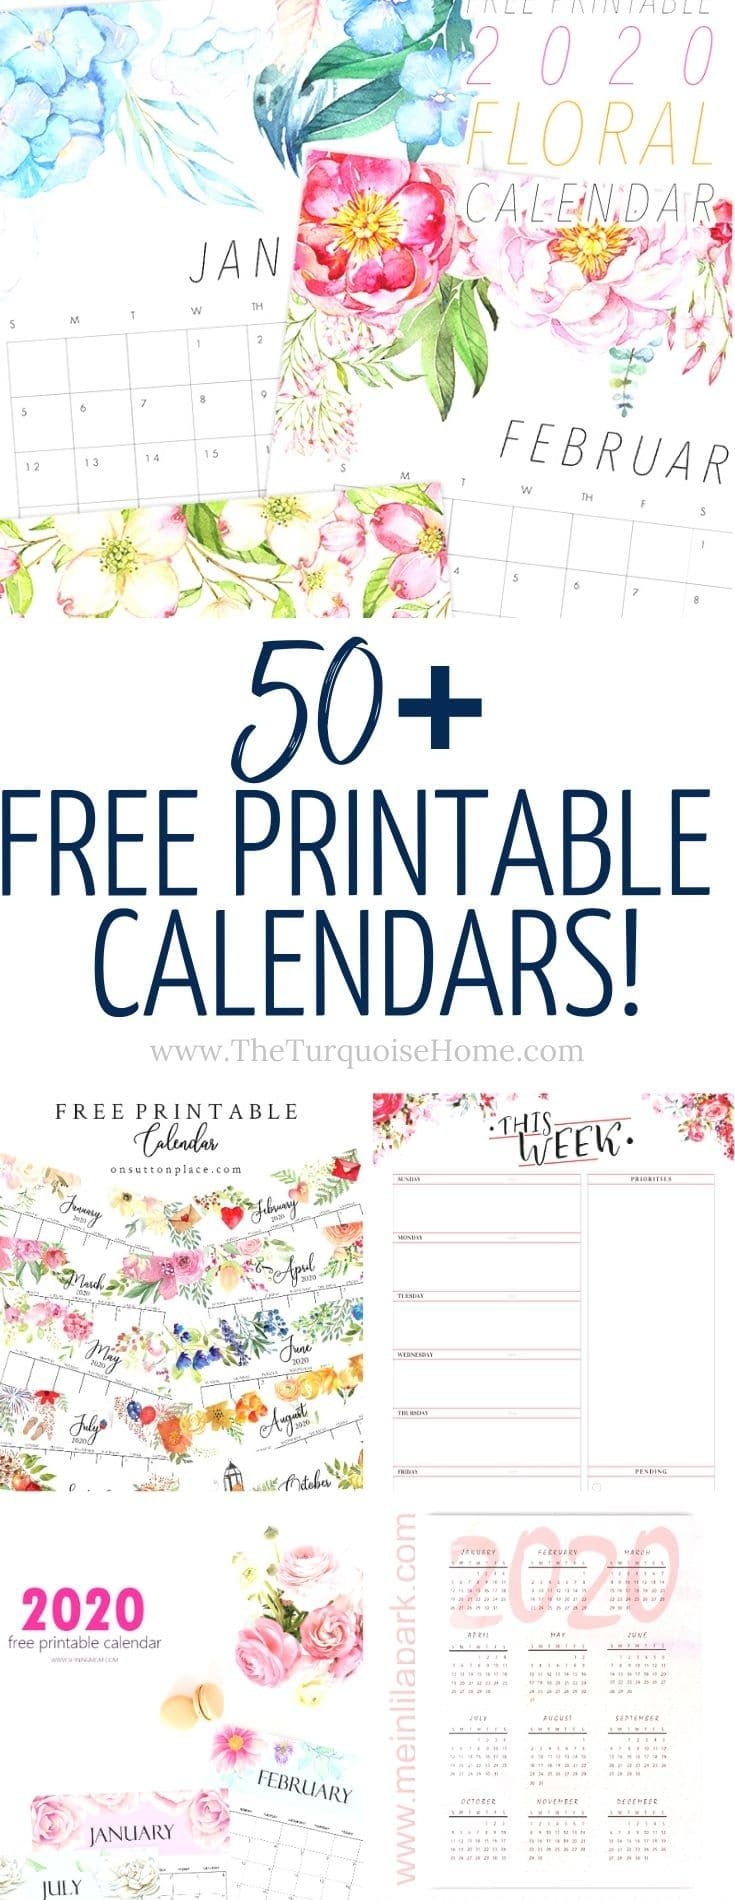 50+ Free Printable Calendars For 2020 | The Turquoise Home